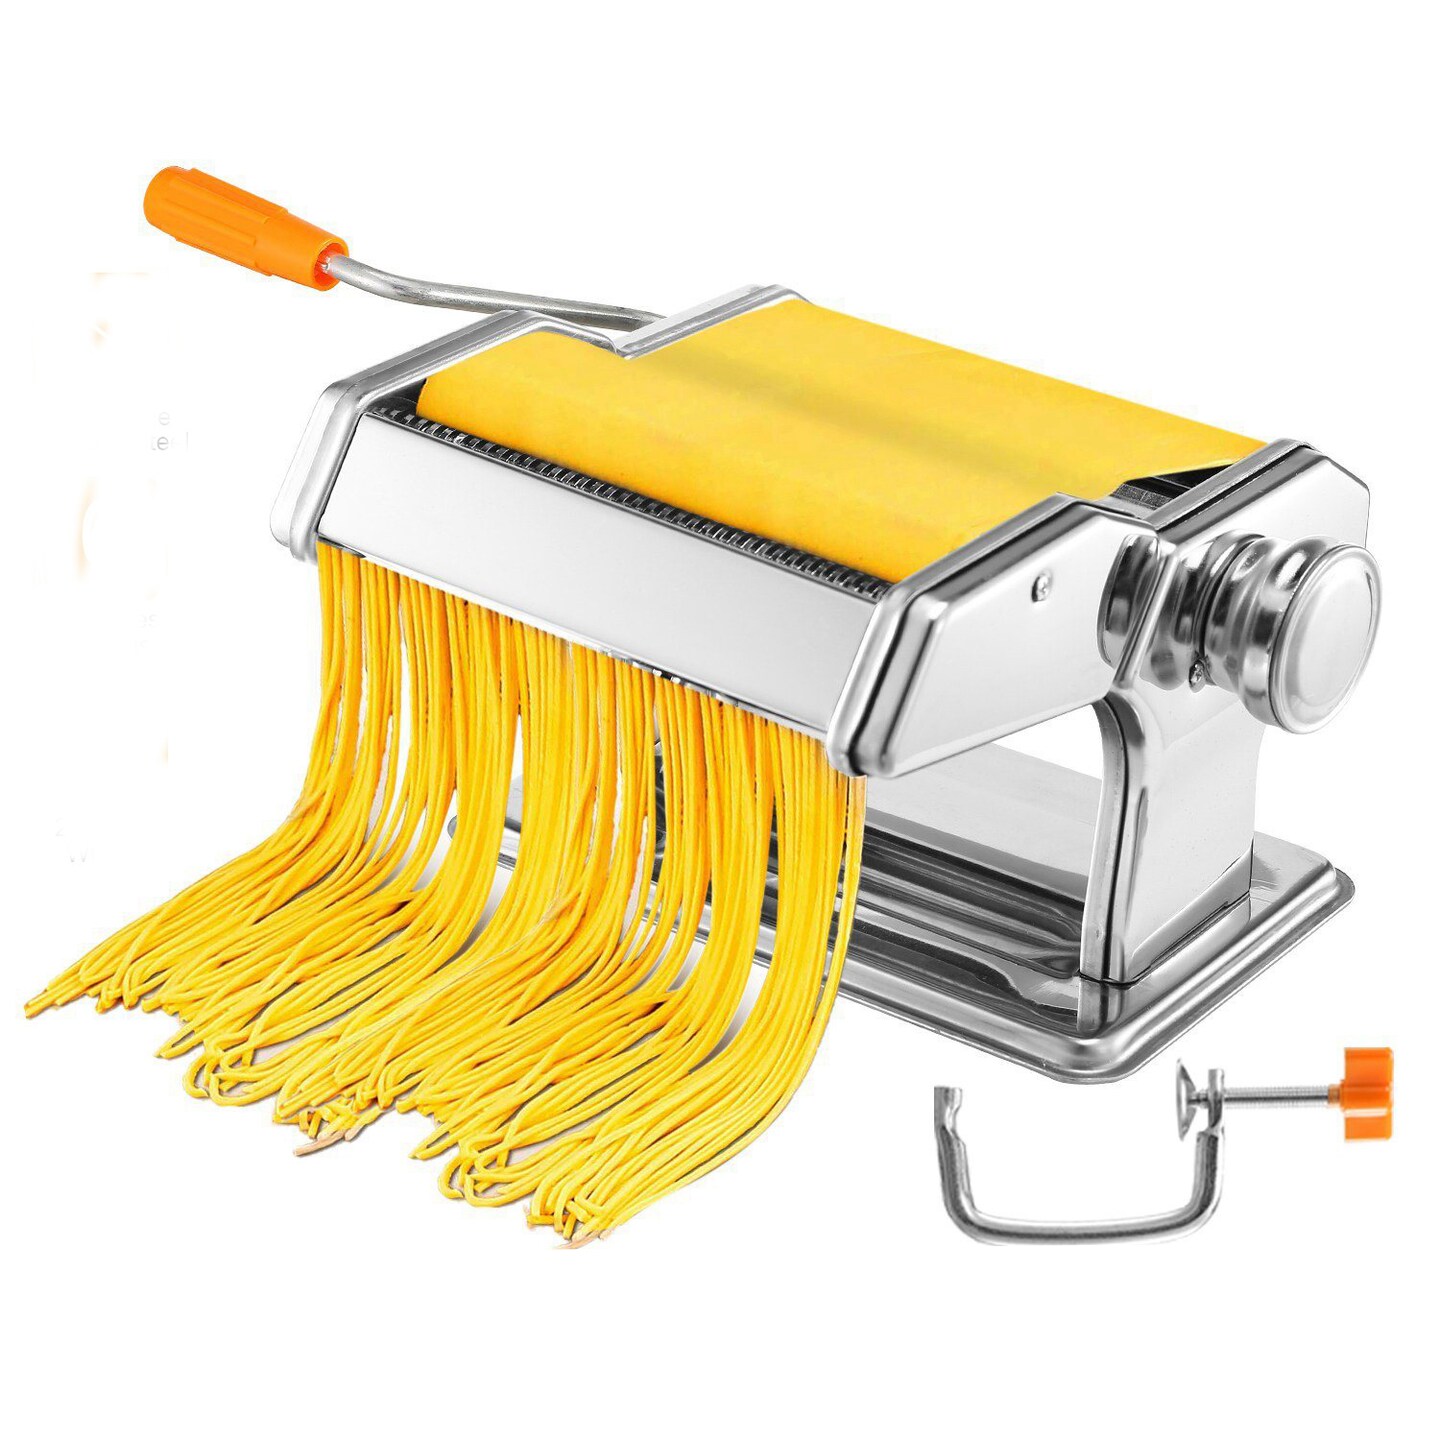 Pasta machines and clay rollers in  online store